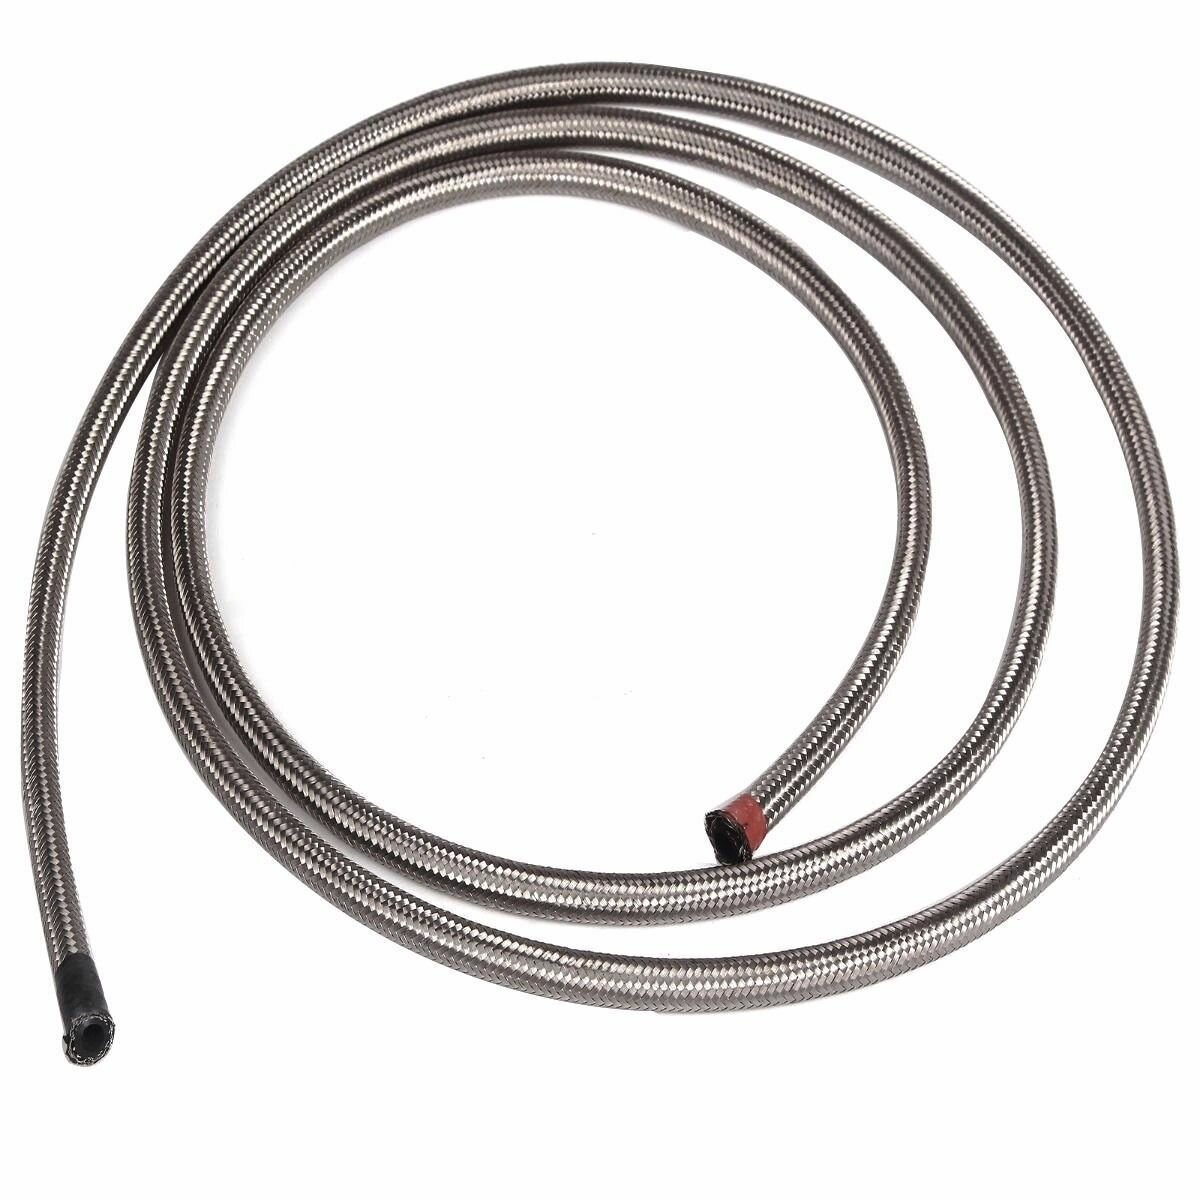 10 Feet 1000 PSI AN8 Nylon And Stainless Steel Braided Gas Line Hose